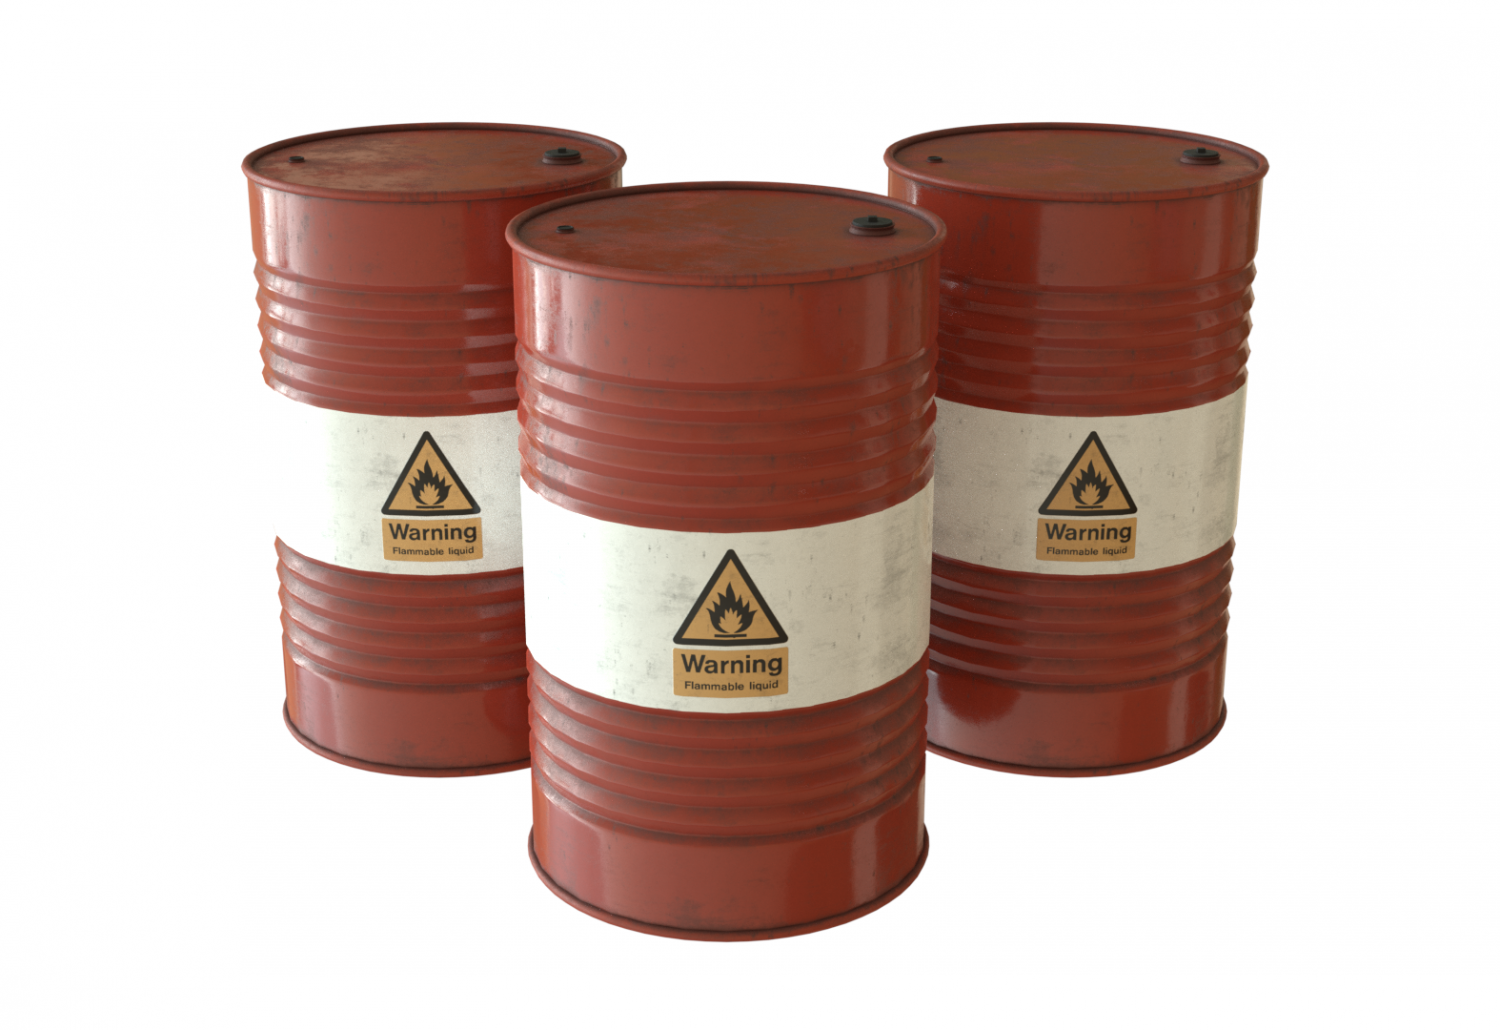 Download New Oil Barrel 3d Model In Shipping Containers 3dexport